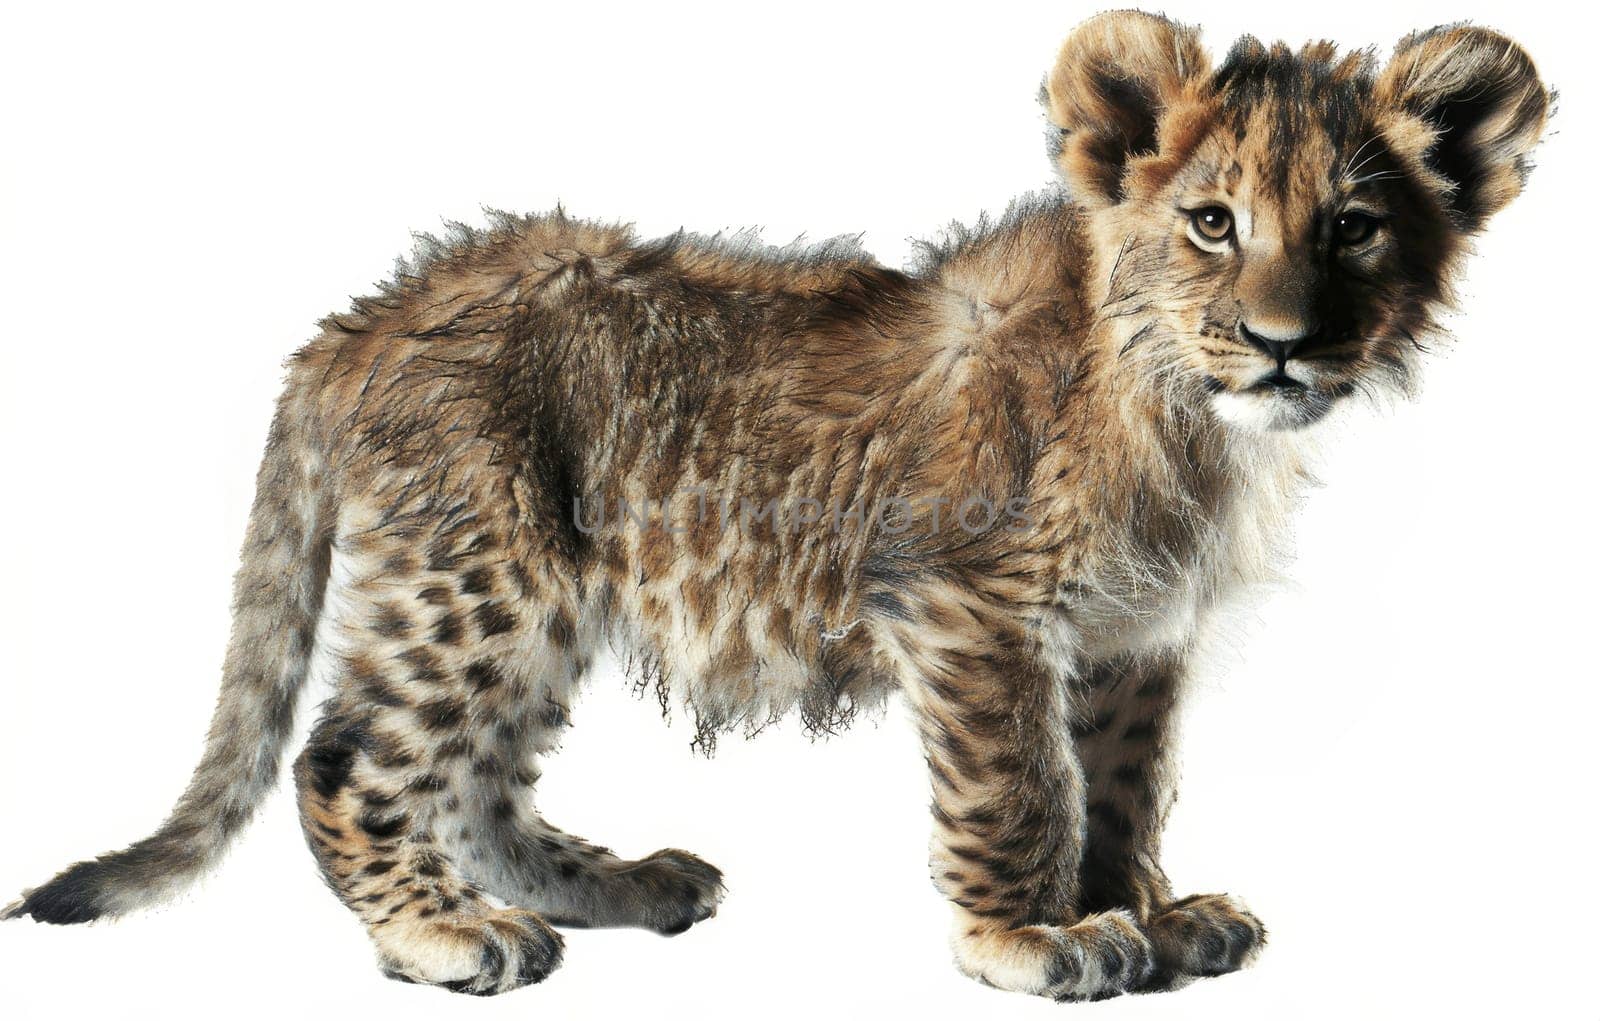 A young lion cub stands alert on a white background, its spotted fur hinting at its wild lineage and future strength.